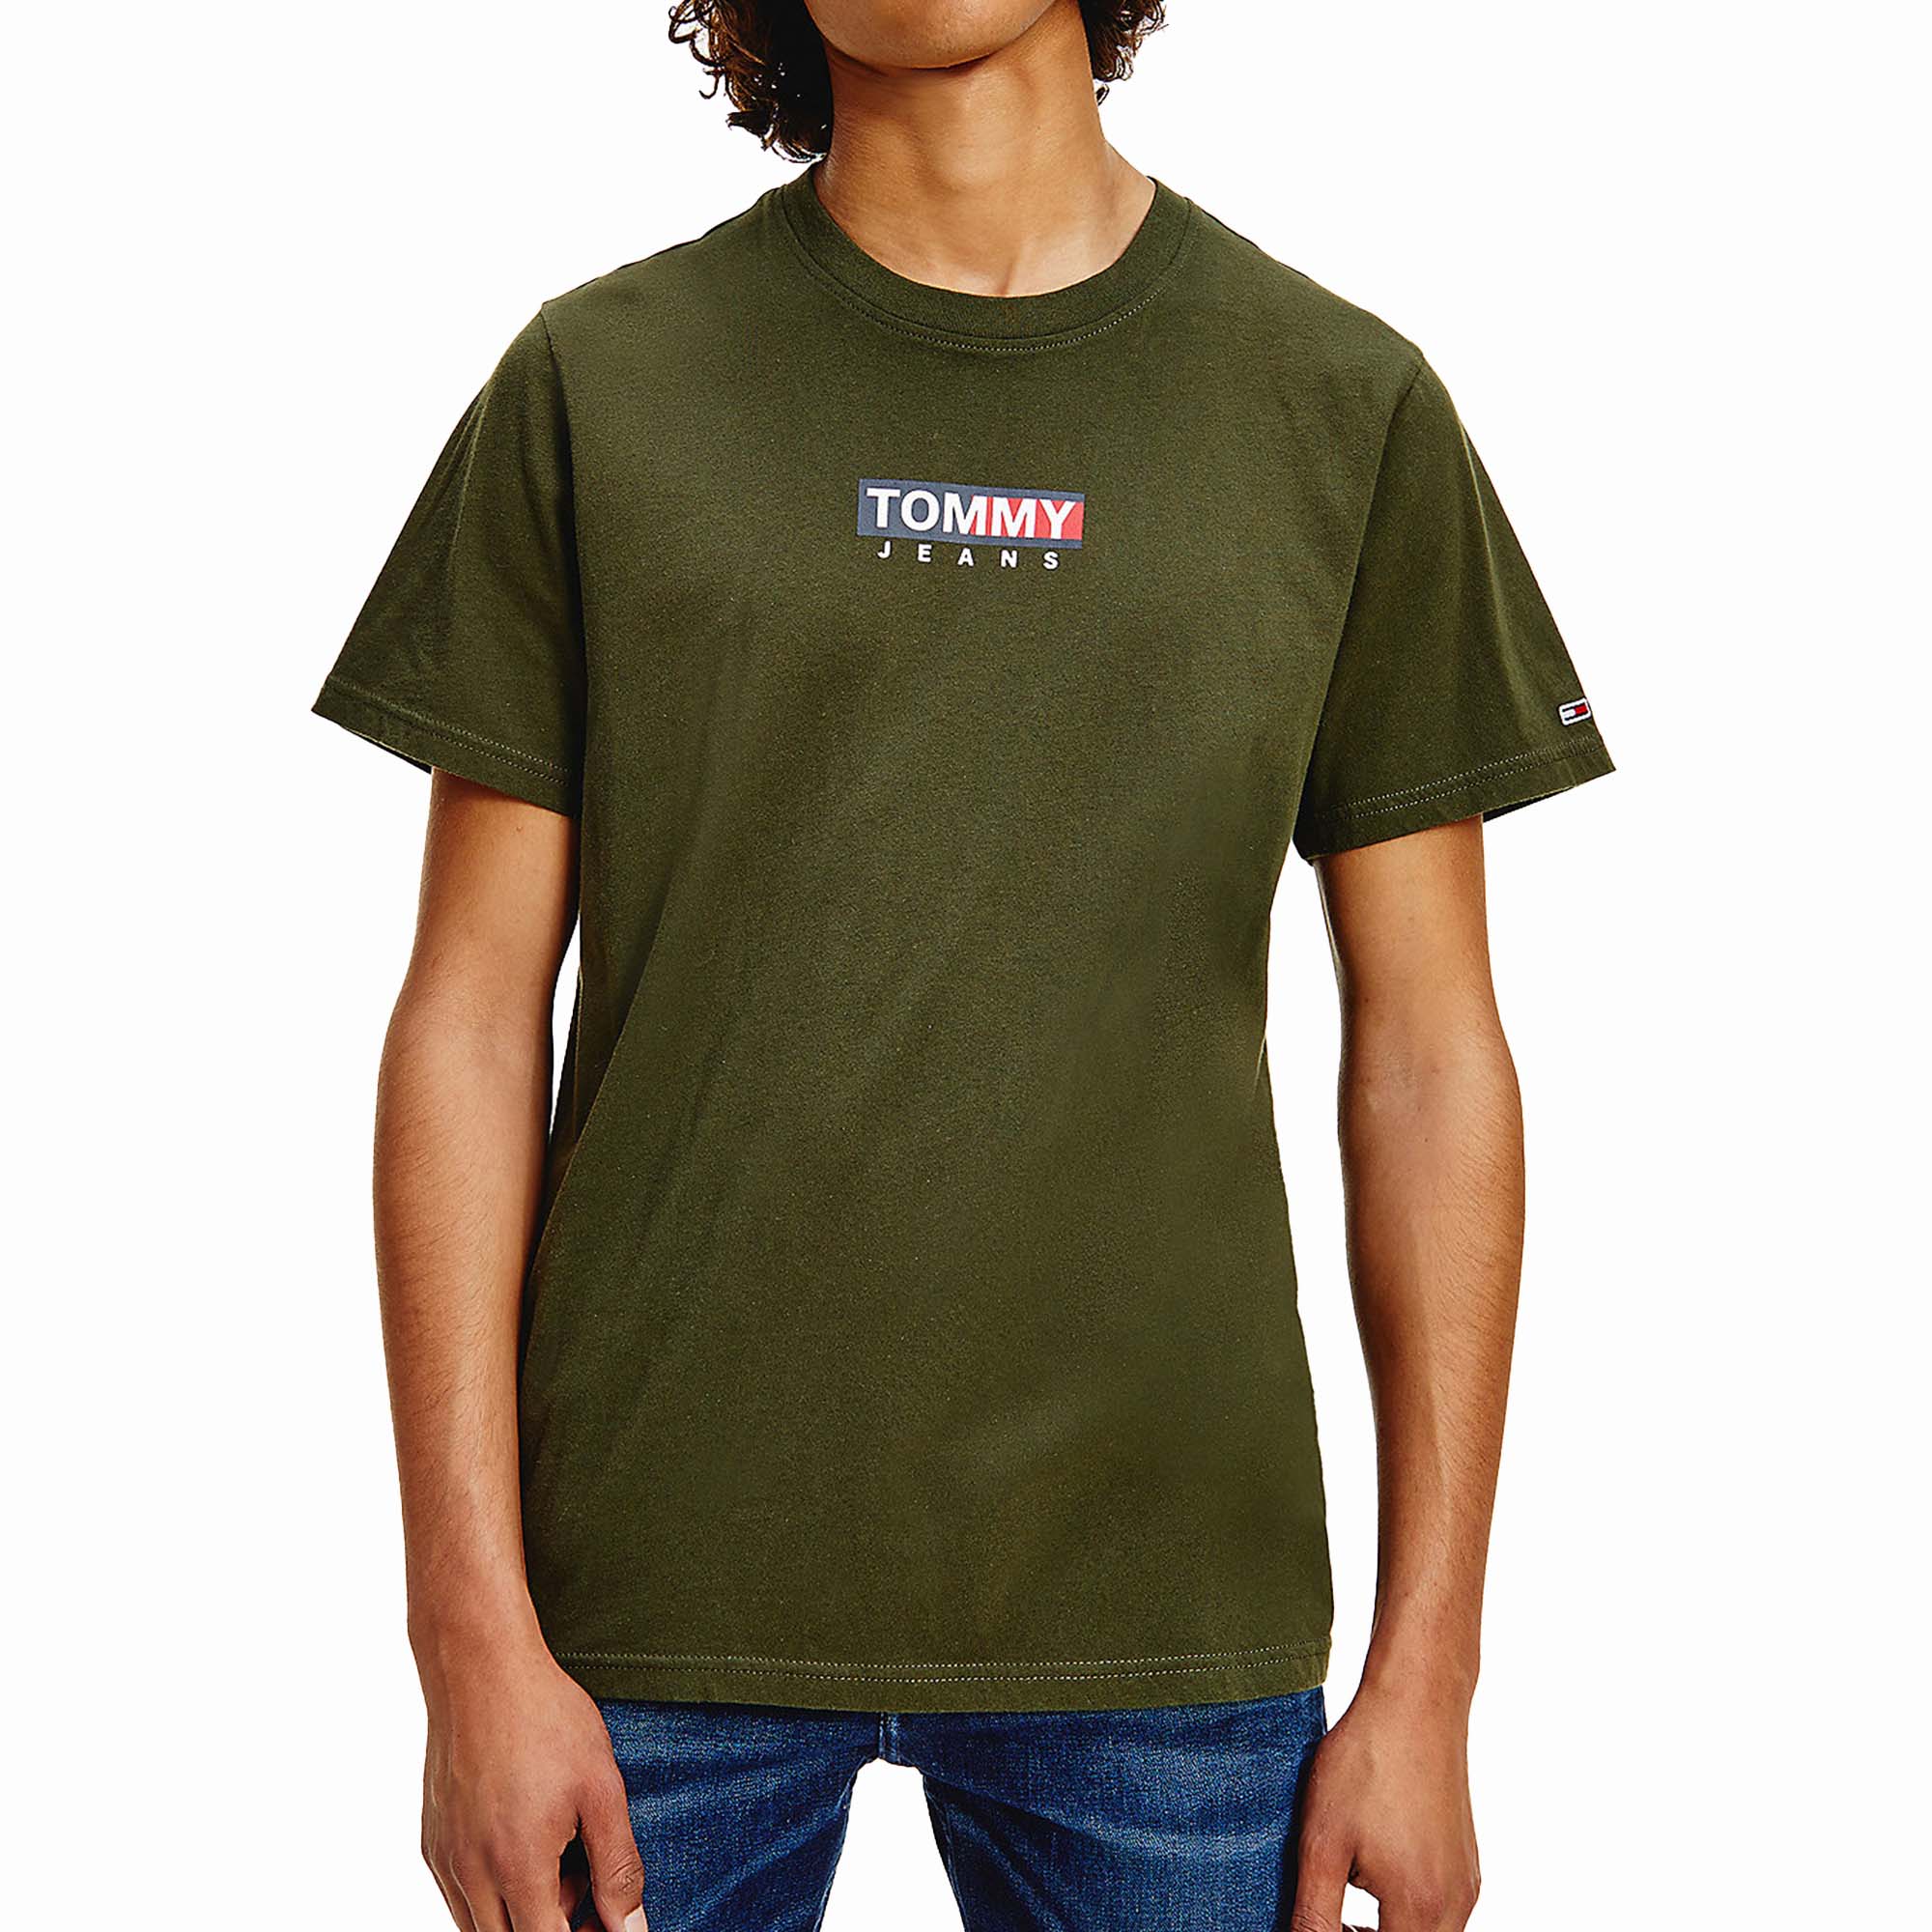 Tommy Jeans Entry Print T-Shirt - Dark Olive